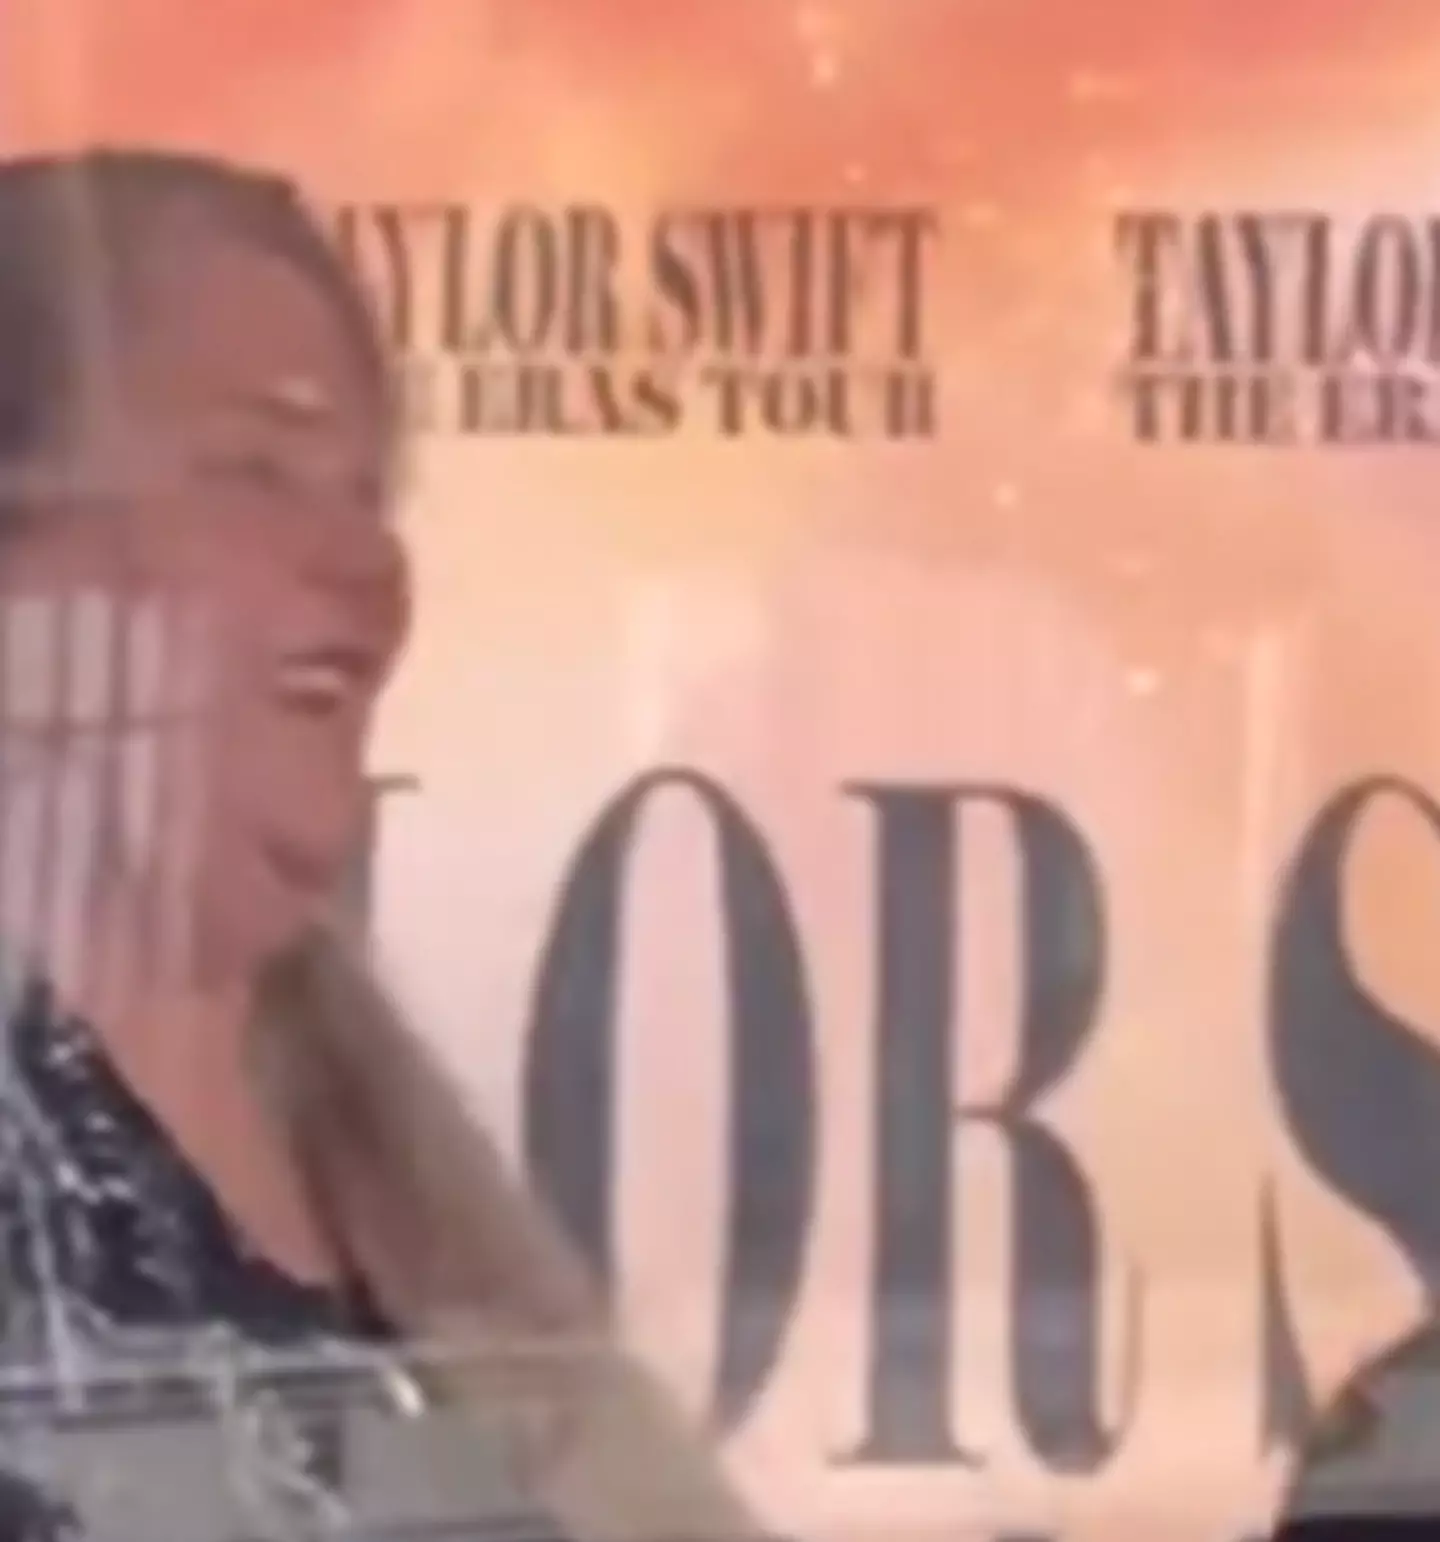 Taylor Swift fans were loving the reaction.